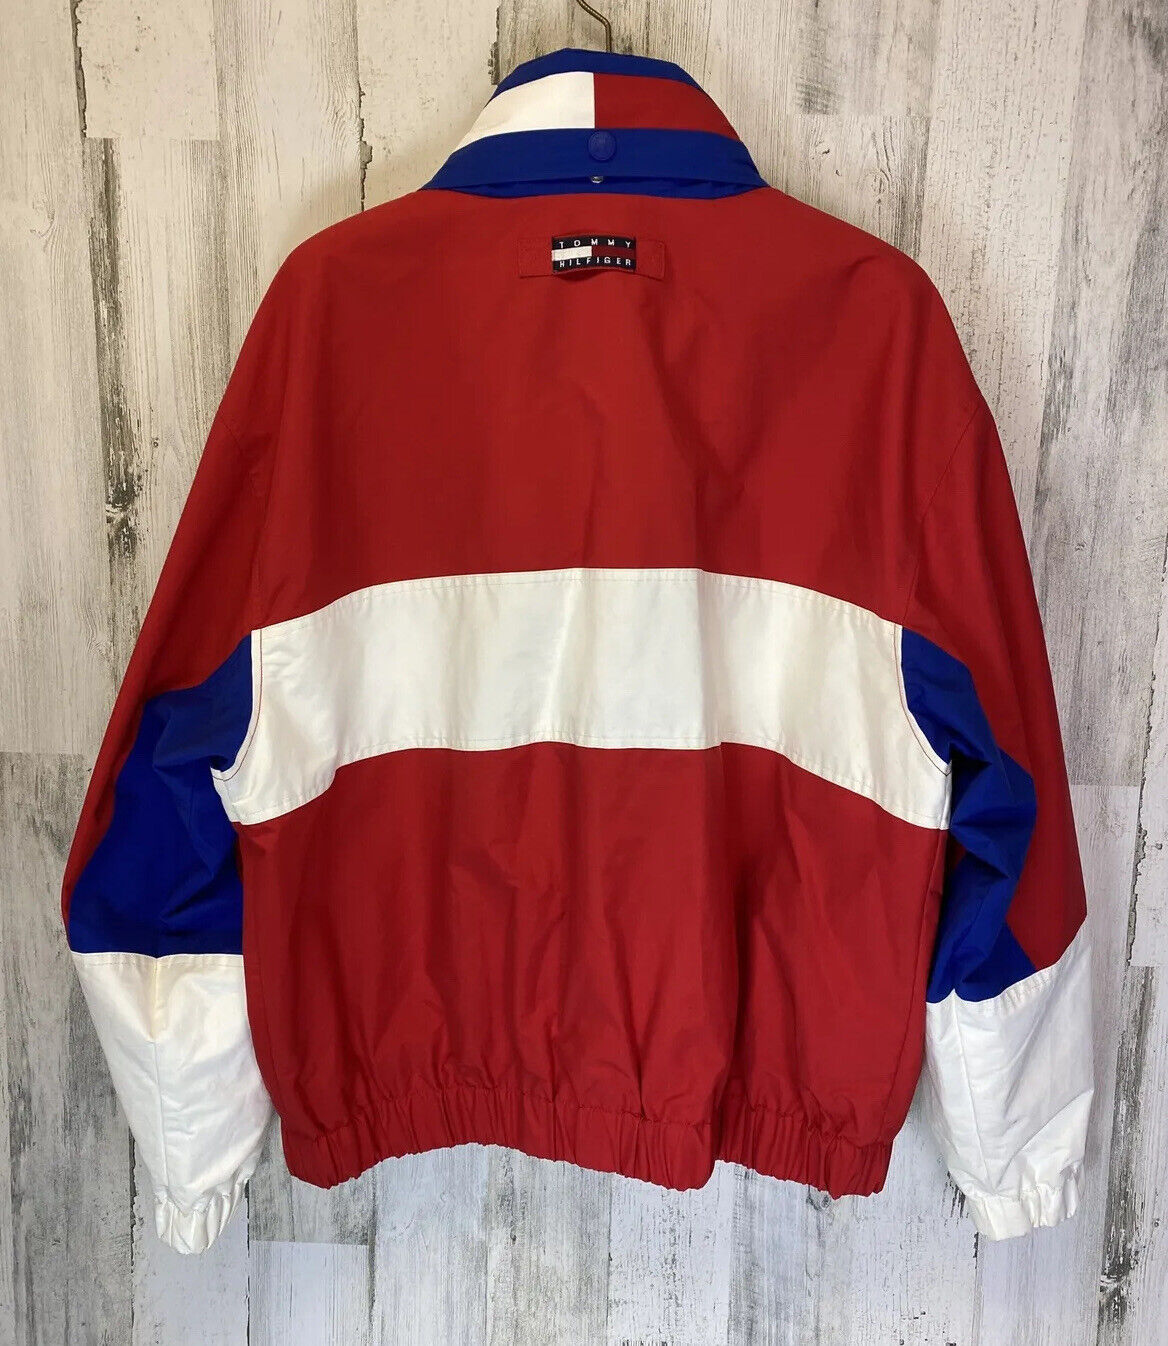 Vintage Tommy Hilfiger Sailing Gear Men's XL Zip Up Jacket Red White Blue  Yellow